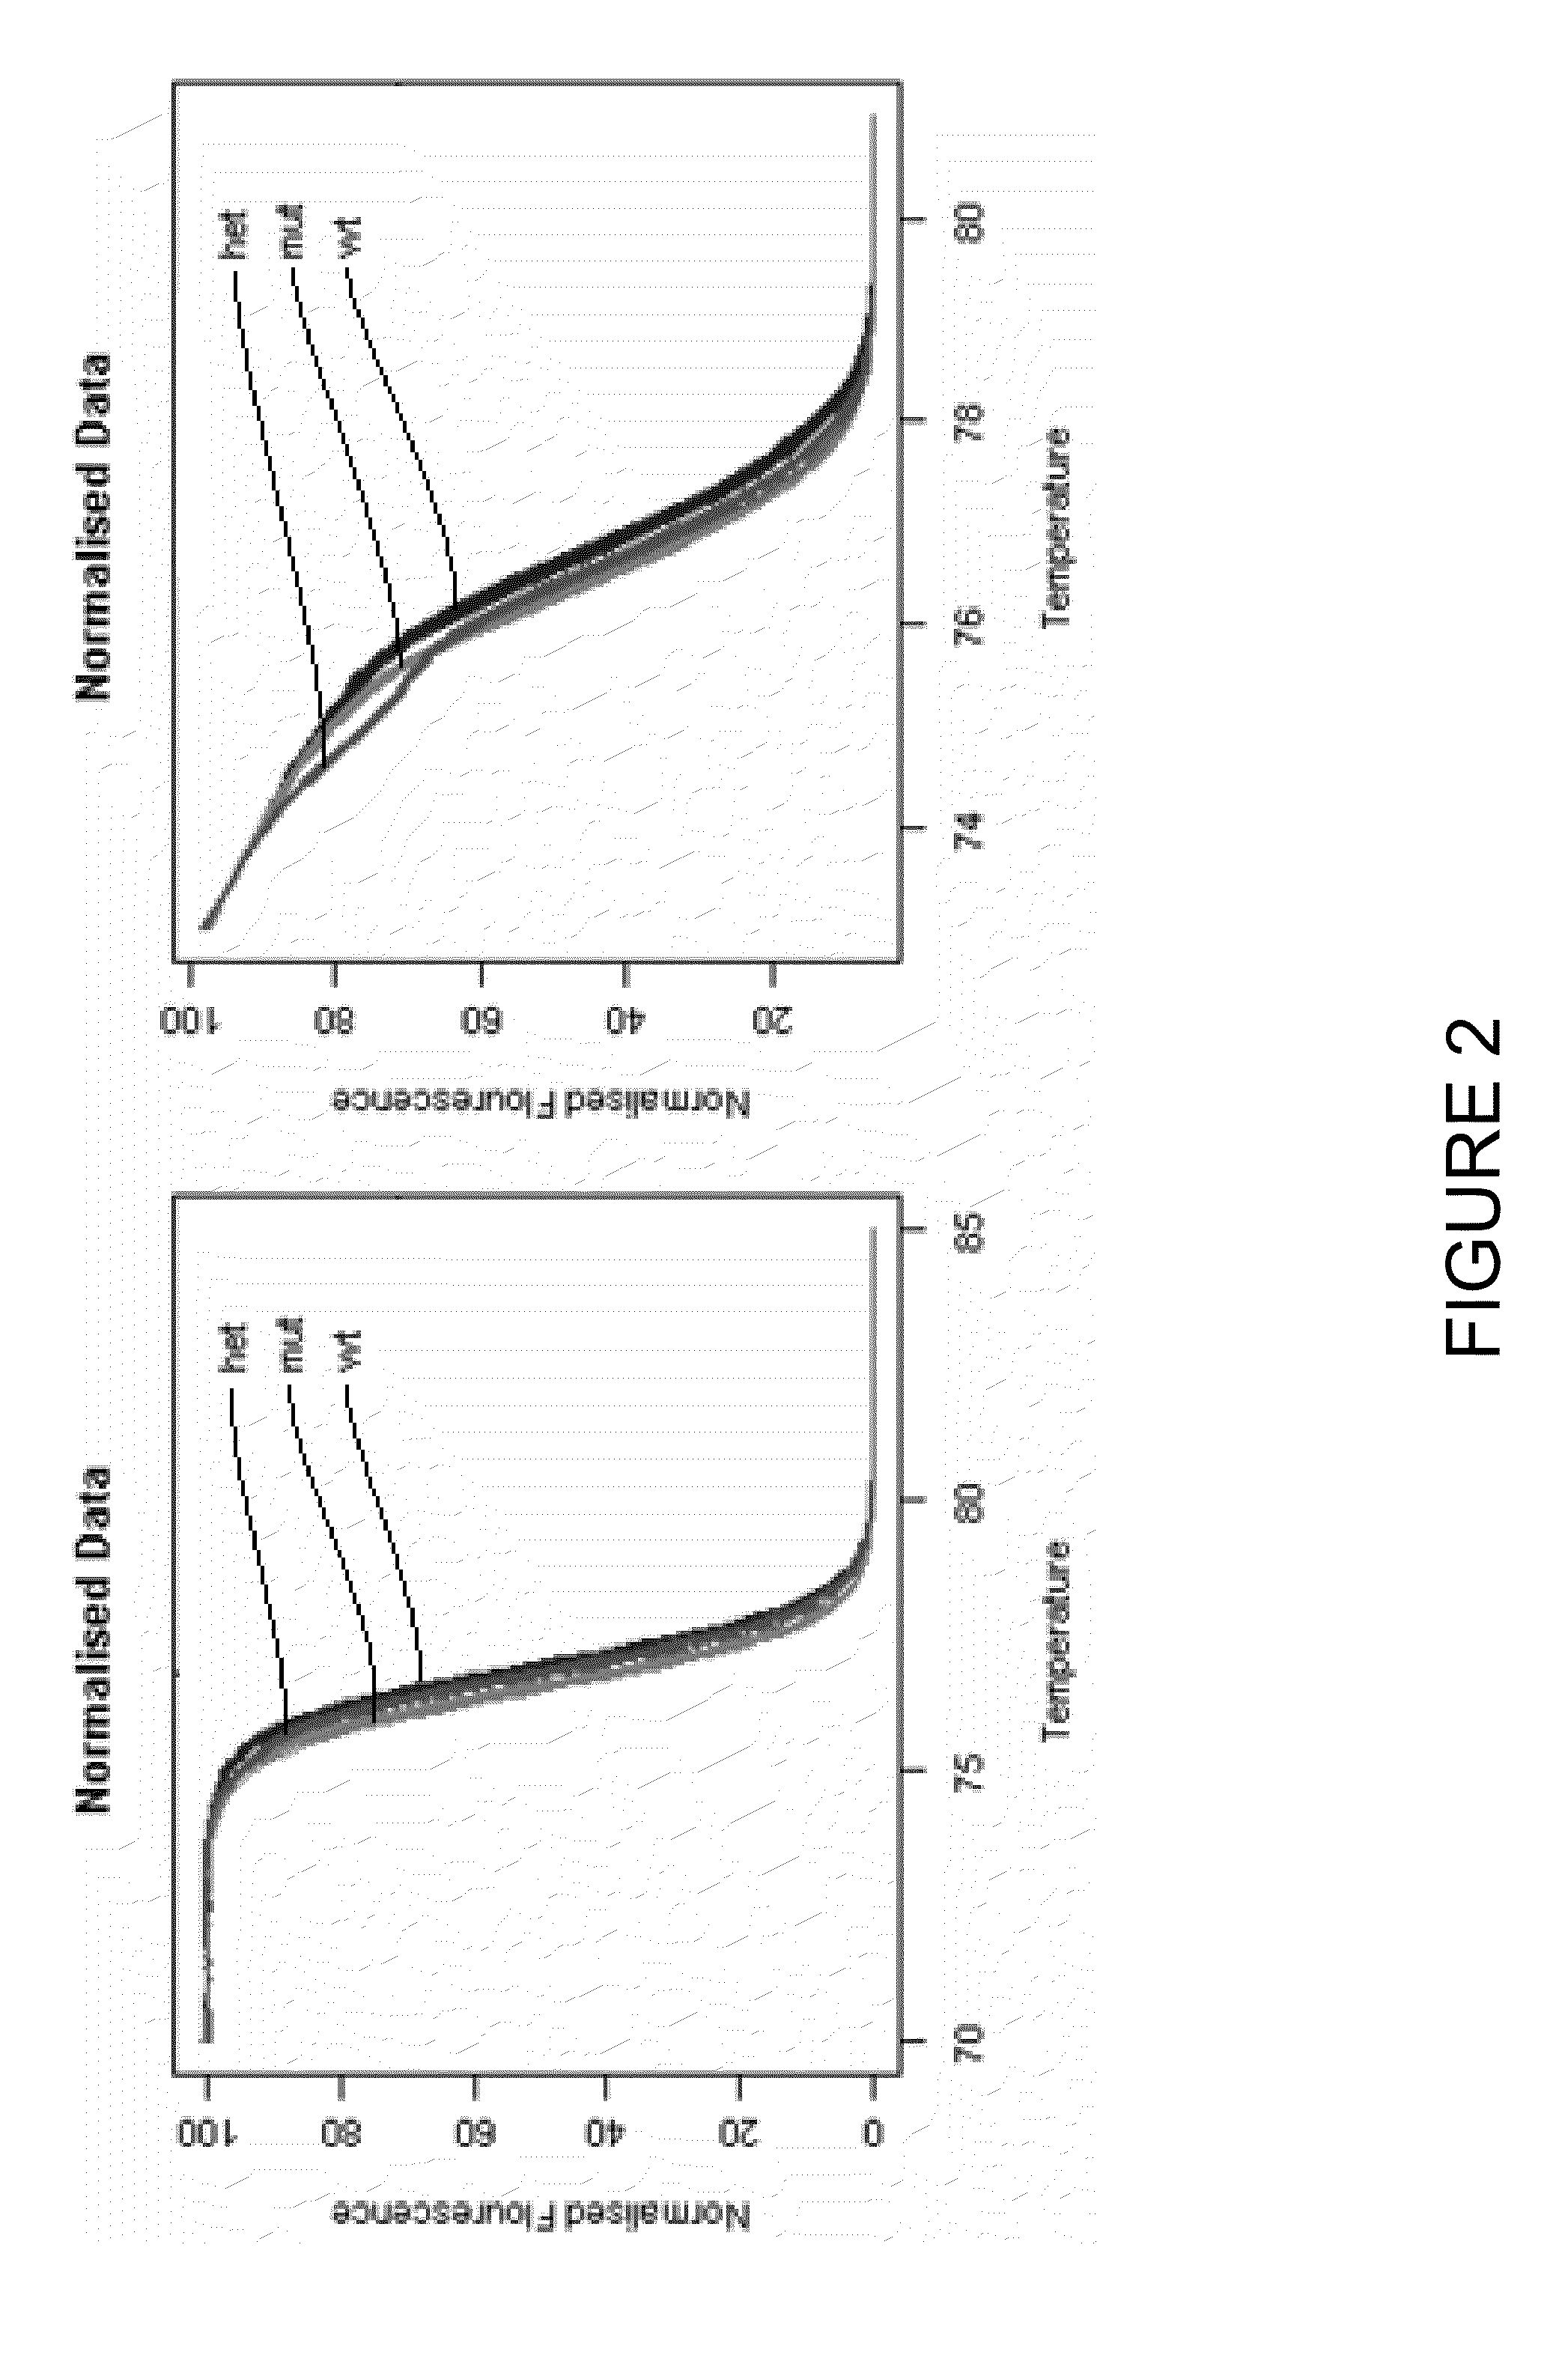 METHOD AND SYSTEM FOR ANALYSIS OF MELT CURVES, PARTICULARLY dsDNA AND PROTEIN MELT CURVES